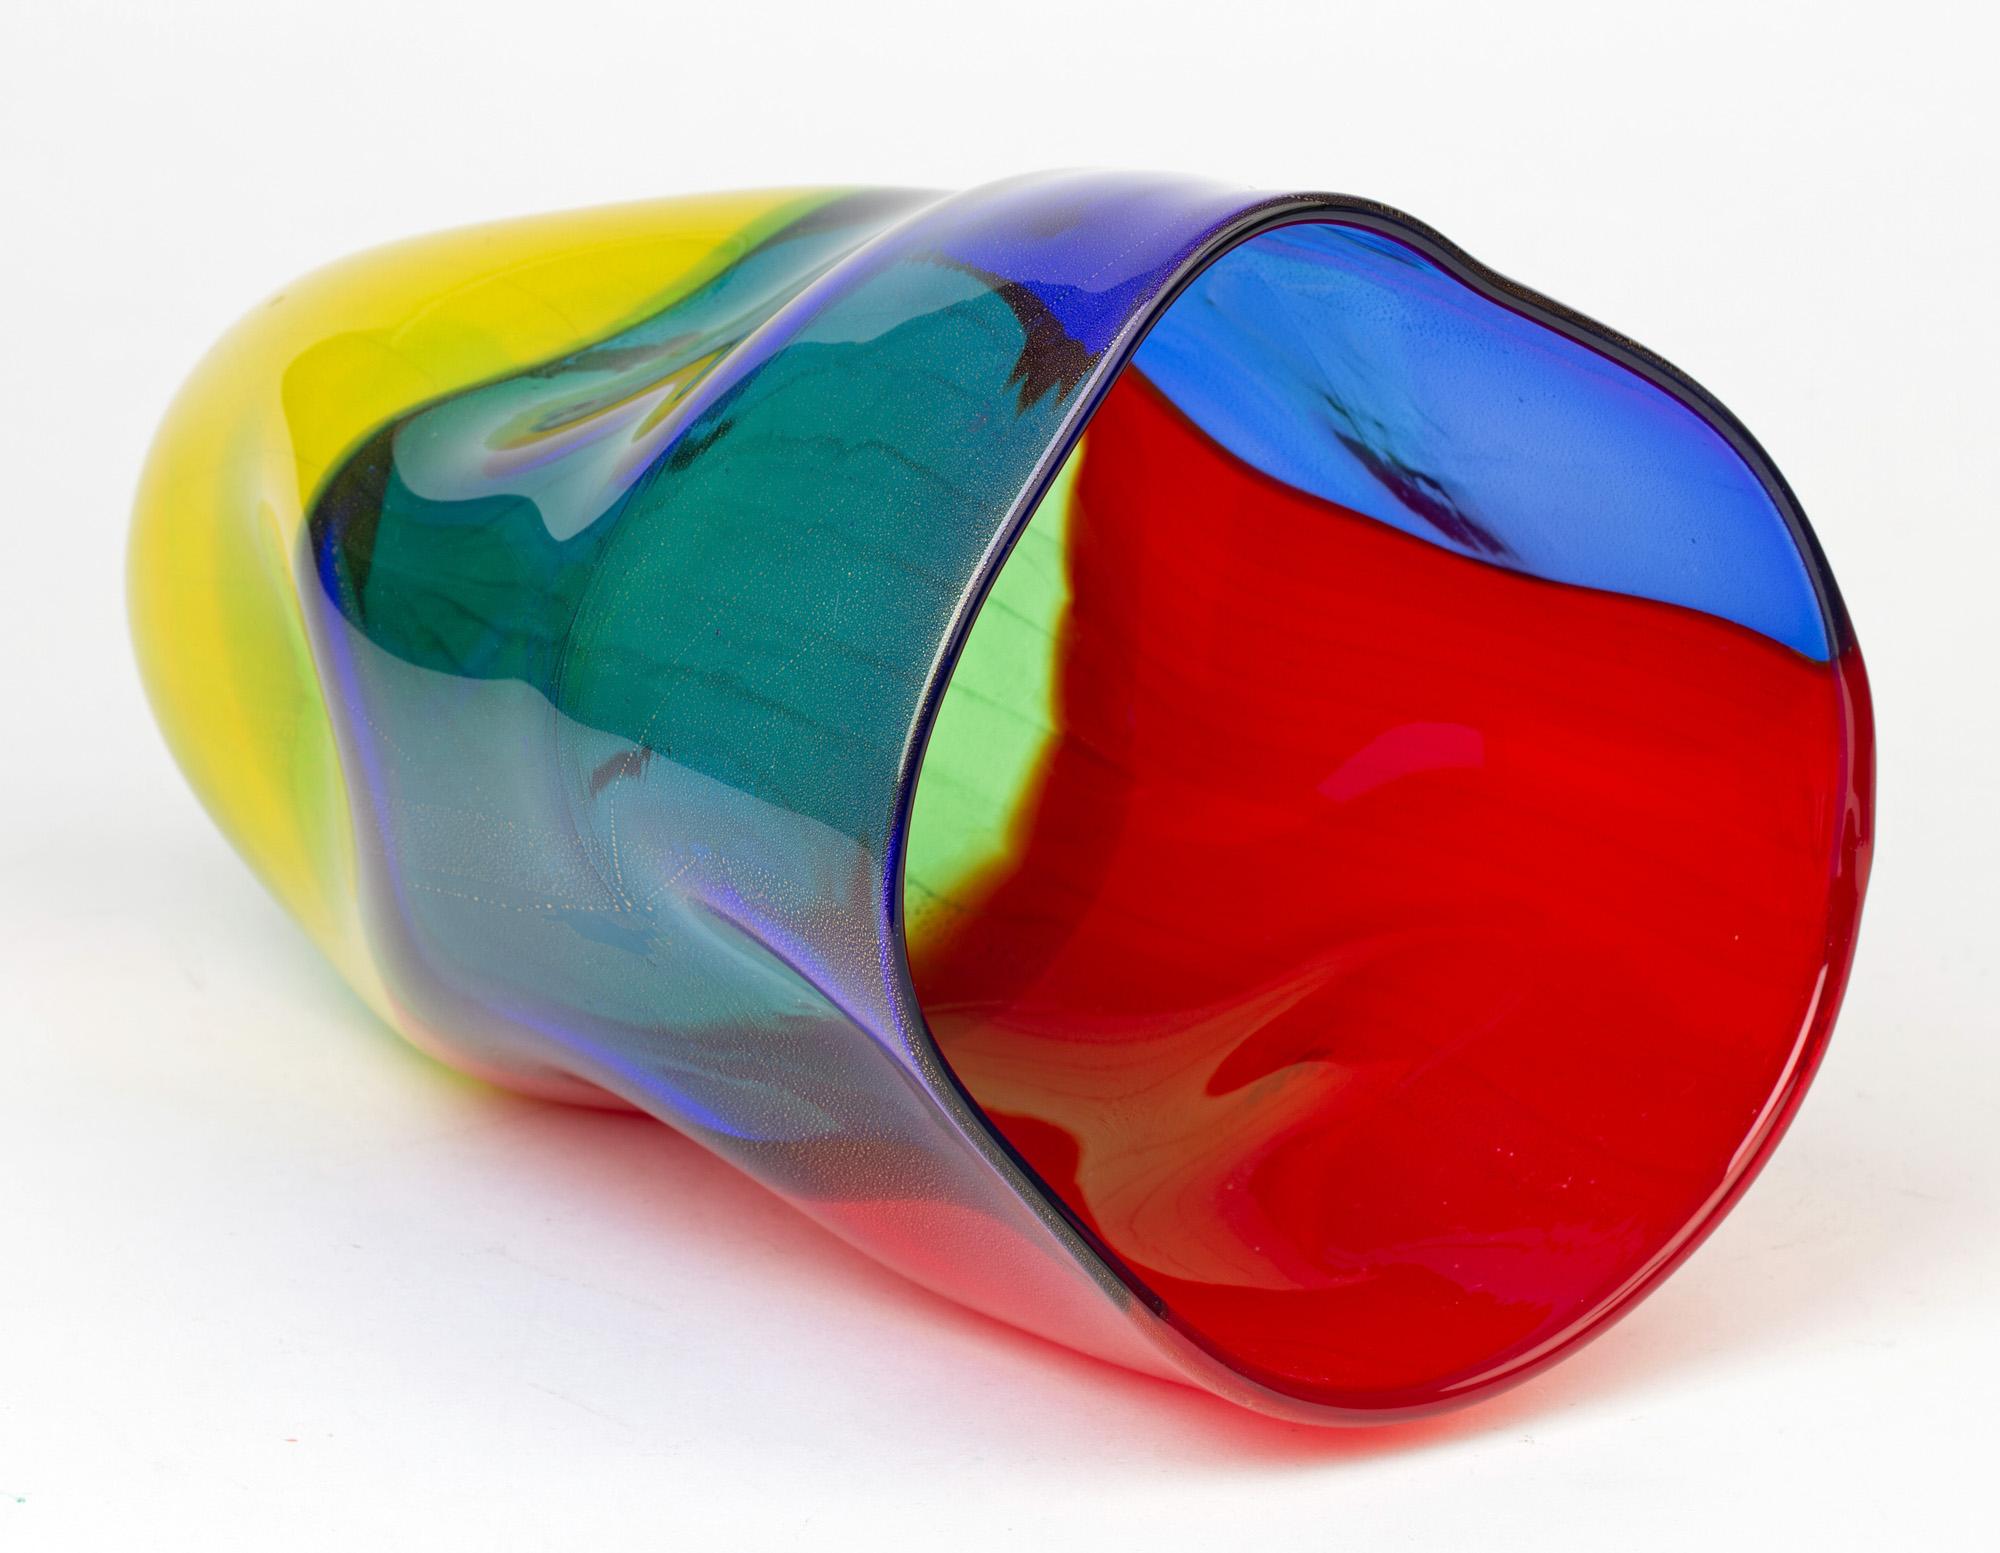 A stunning Italian Murano art glass '4 Quarti' incalmo colored glass vase designed by Seguso Viro as part of their 'Collezioni' range and probably dating from circa 1960-1970. The vase uses the incalmo technique in joining the four distinct colours